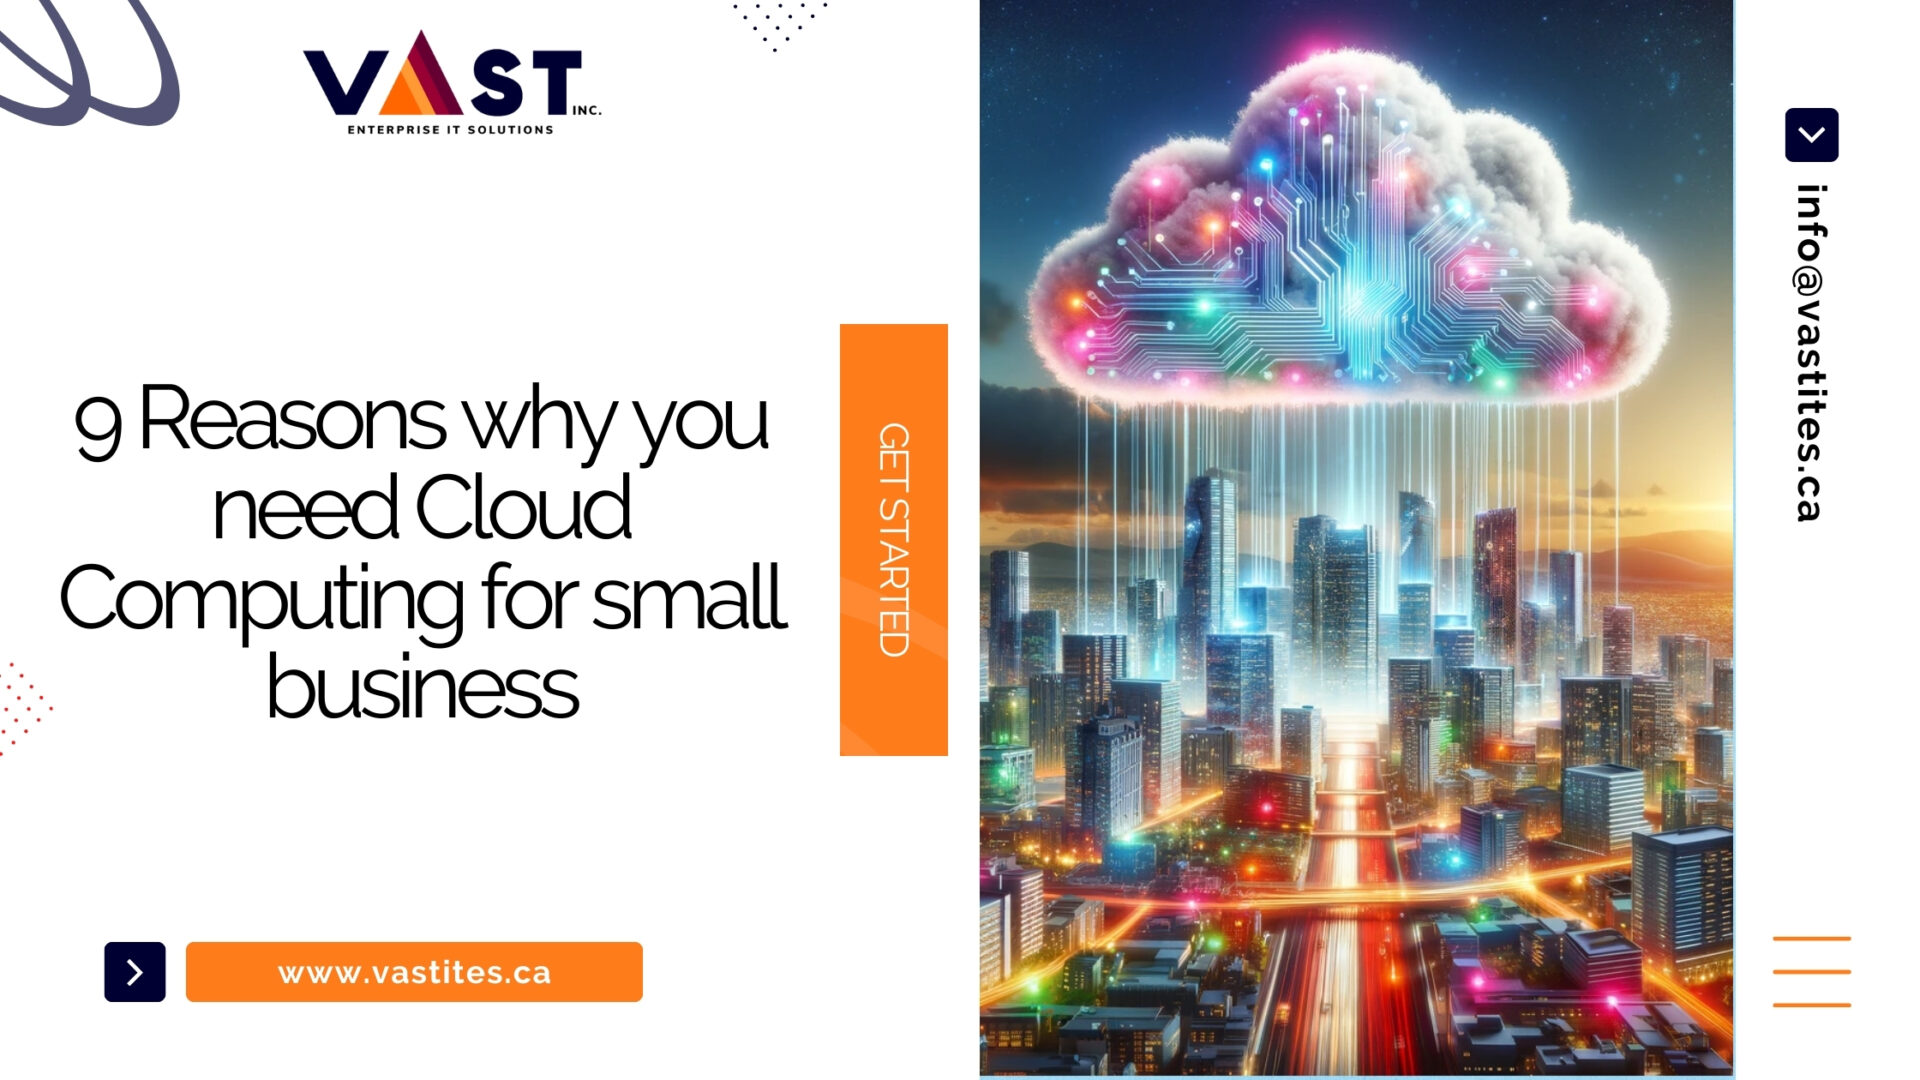 9 reasons why you need cloud computing for small business - VaST ITES Inc